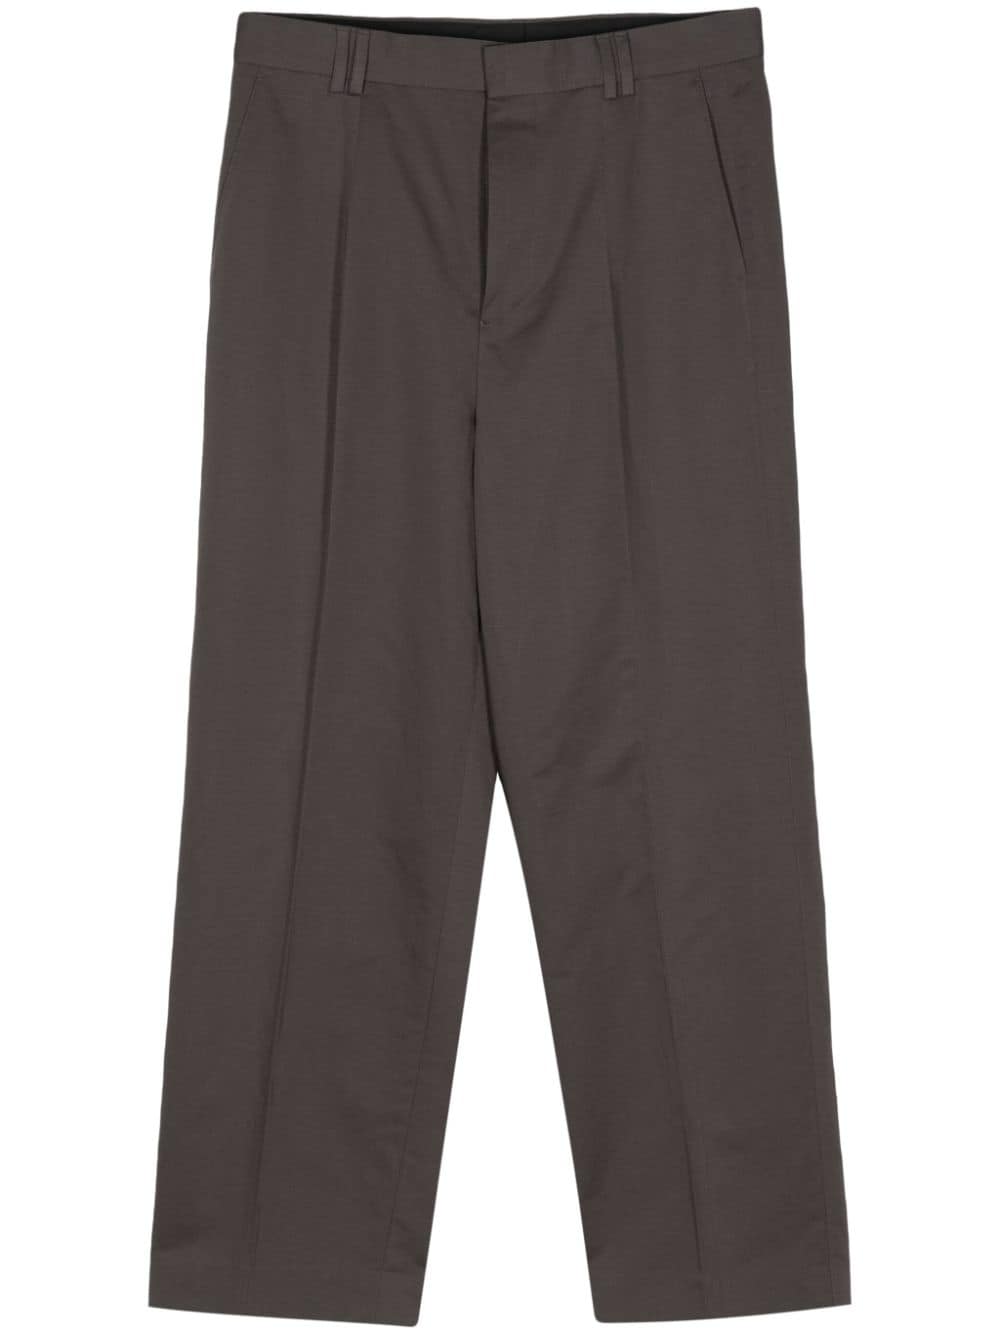 Paul Smith mélange-effect tailored trousers - Grey von Paul Smith